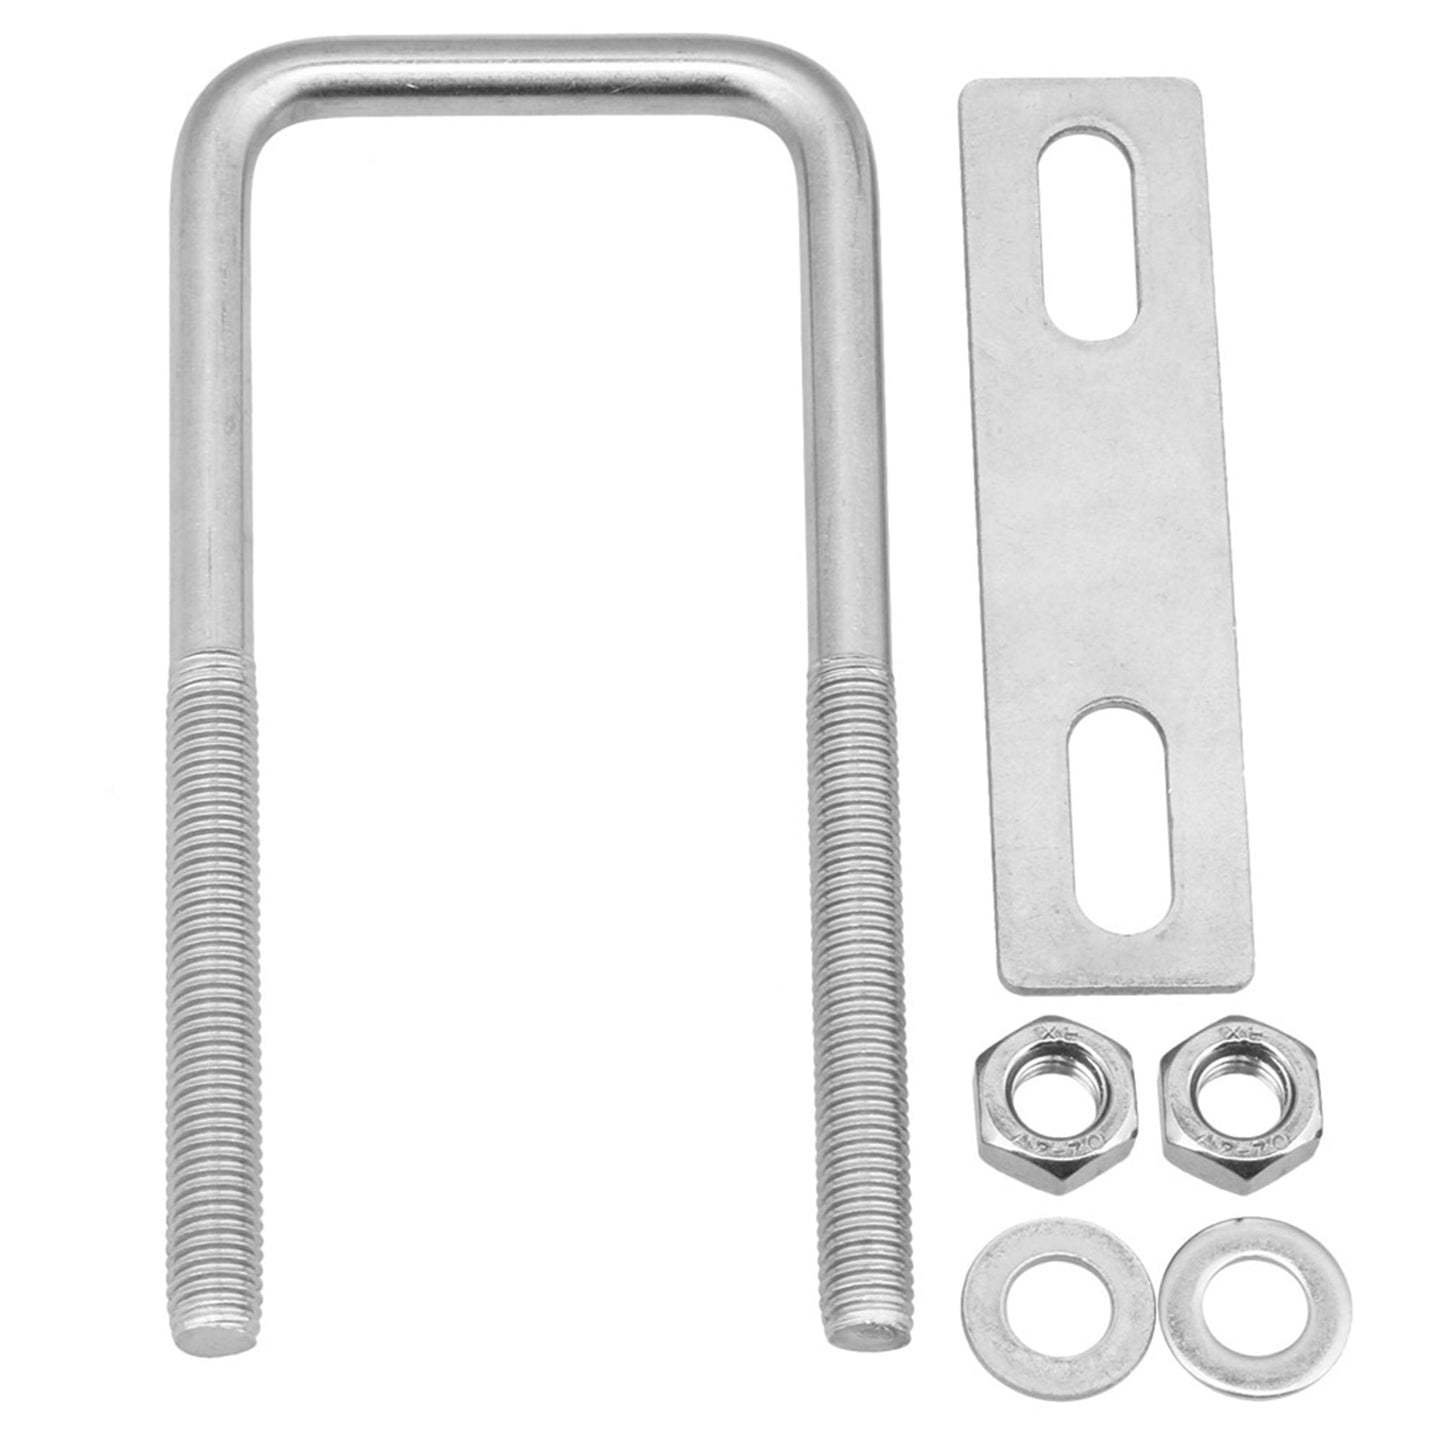 BQLZR Silver 304 Stainless Steel U Bolts Square Shape M8x45x120 with Plate Nuts Set